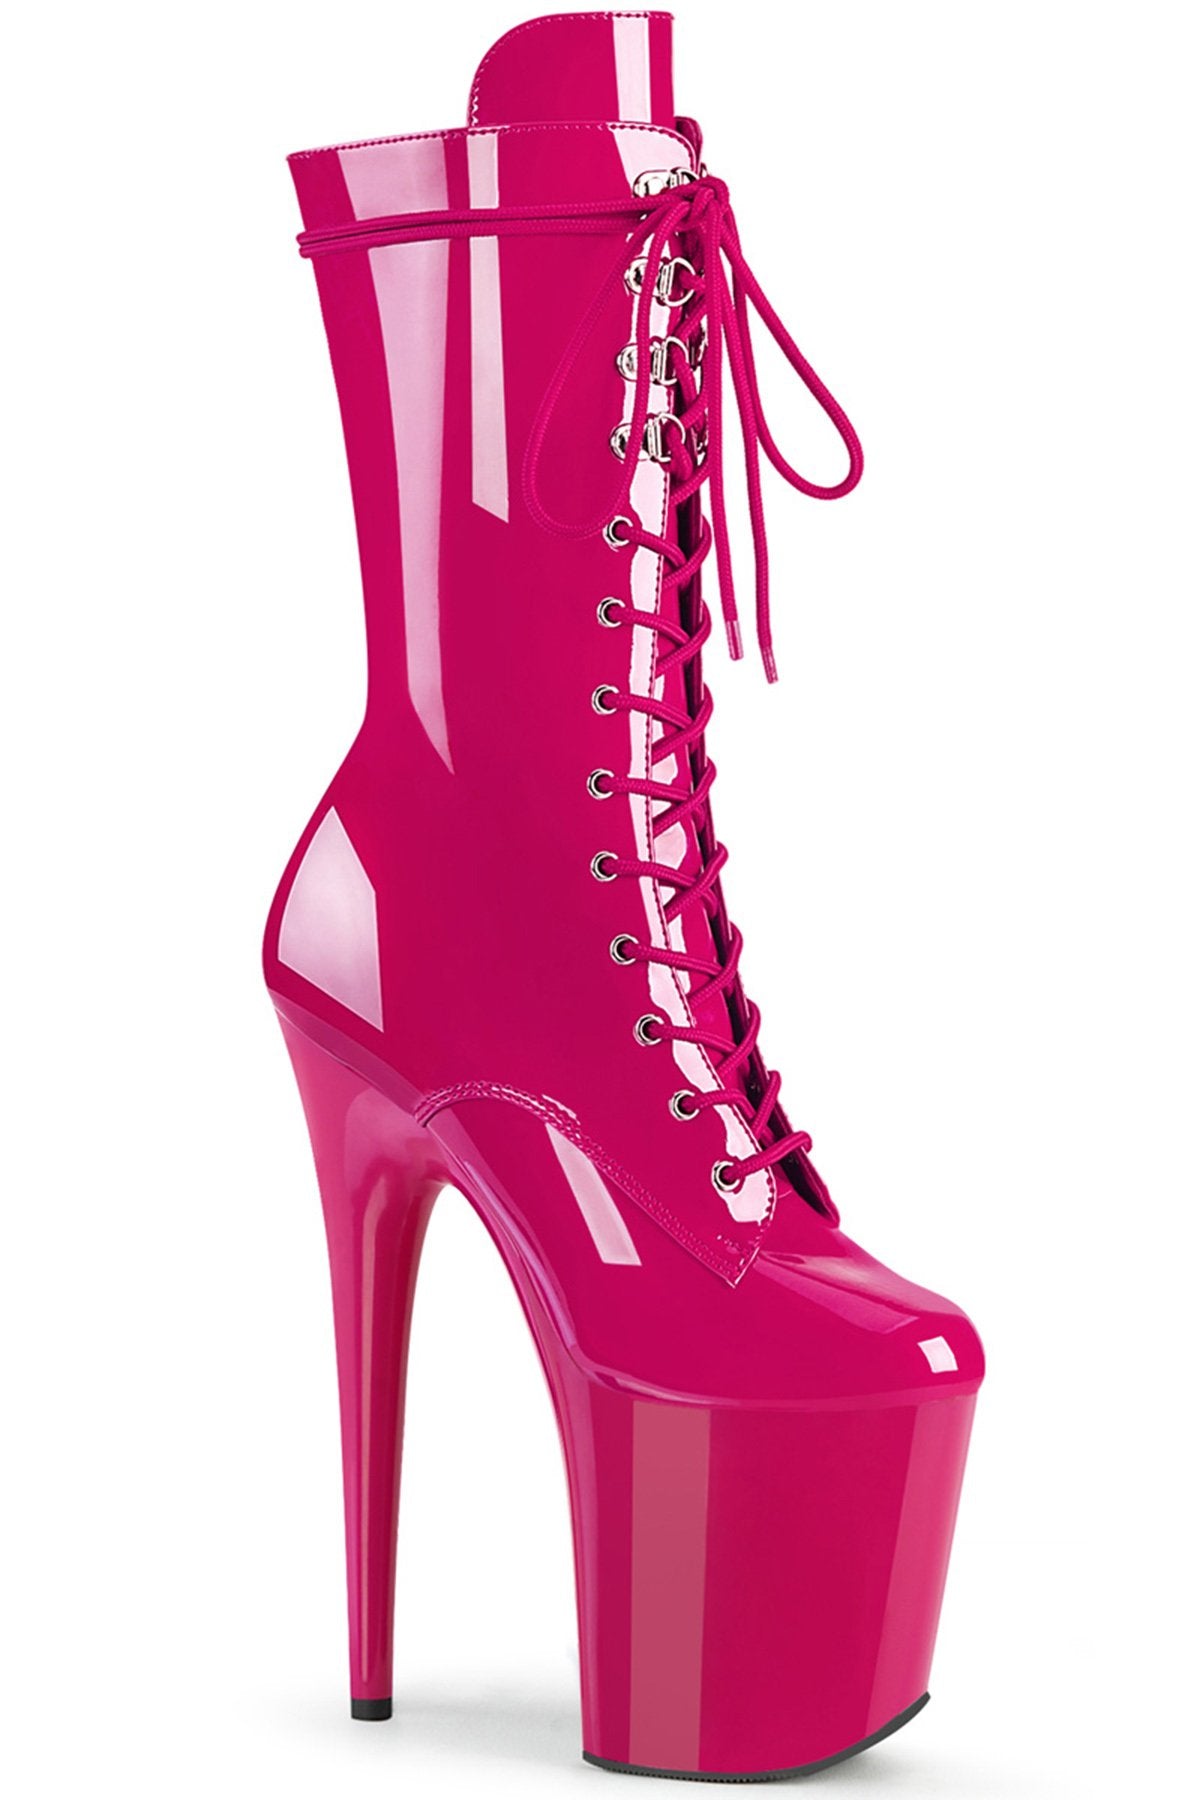 Pleaser USA Flamingo-1050 8inch Pleaser Boots - Patent Hot Pink-Pleaser USA-Pole Junkie